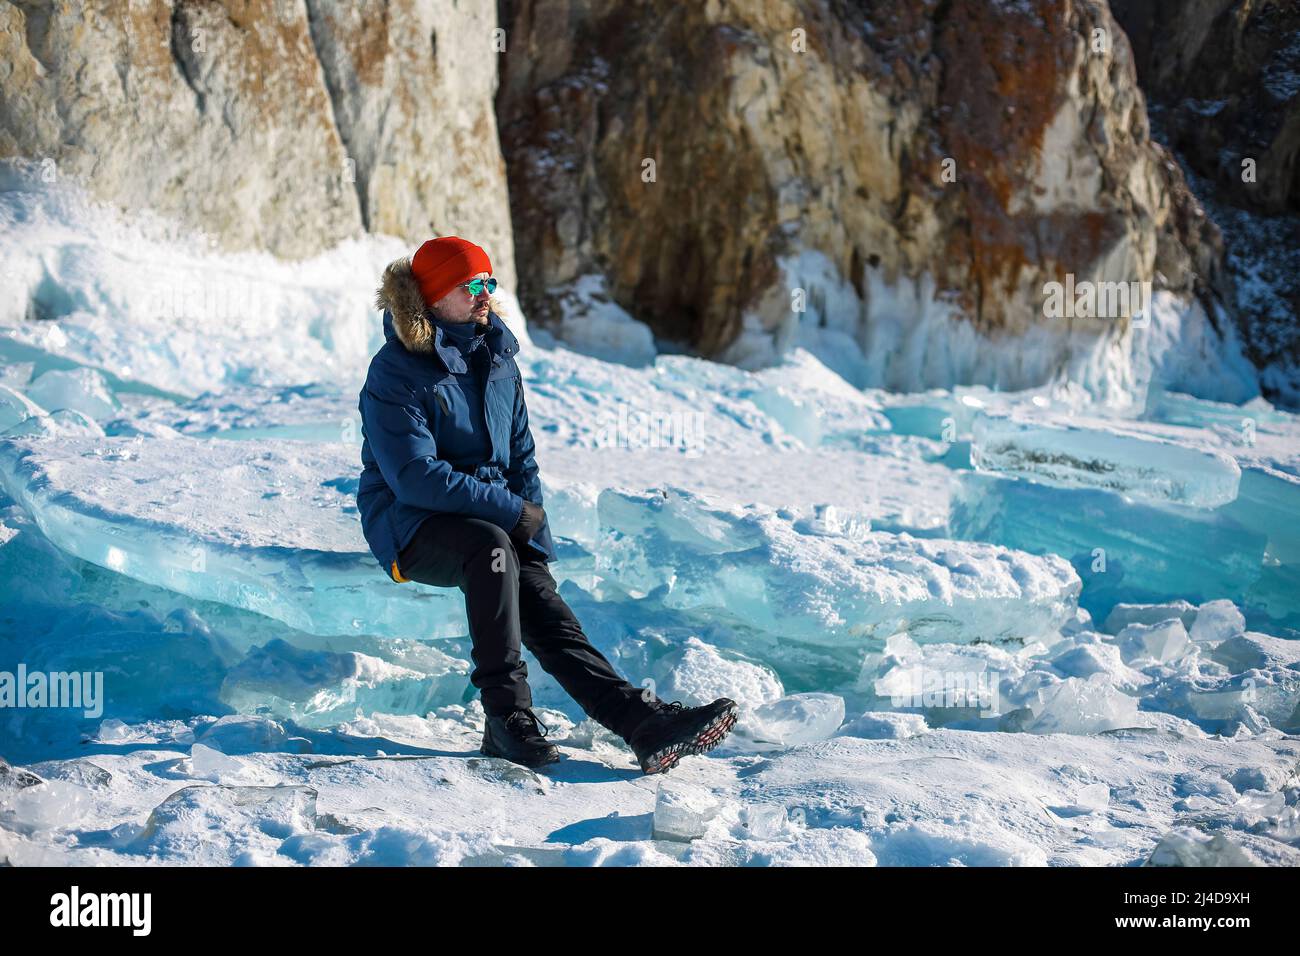 Travel and winter holiday. Lake Baikal. Portrait of the man tourist in red cap and blue jacket wearing sunglasses on ice Stock Photo